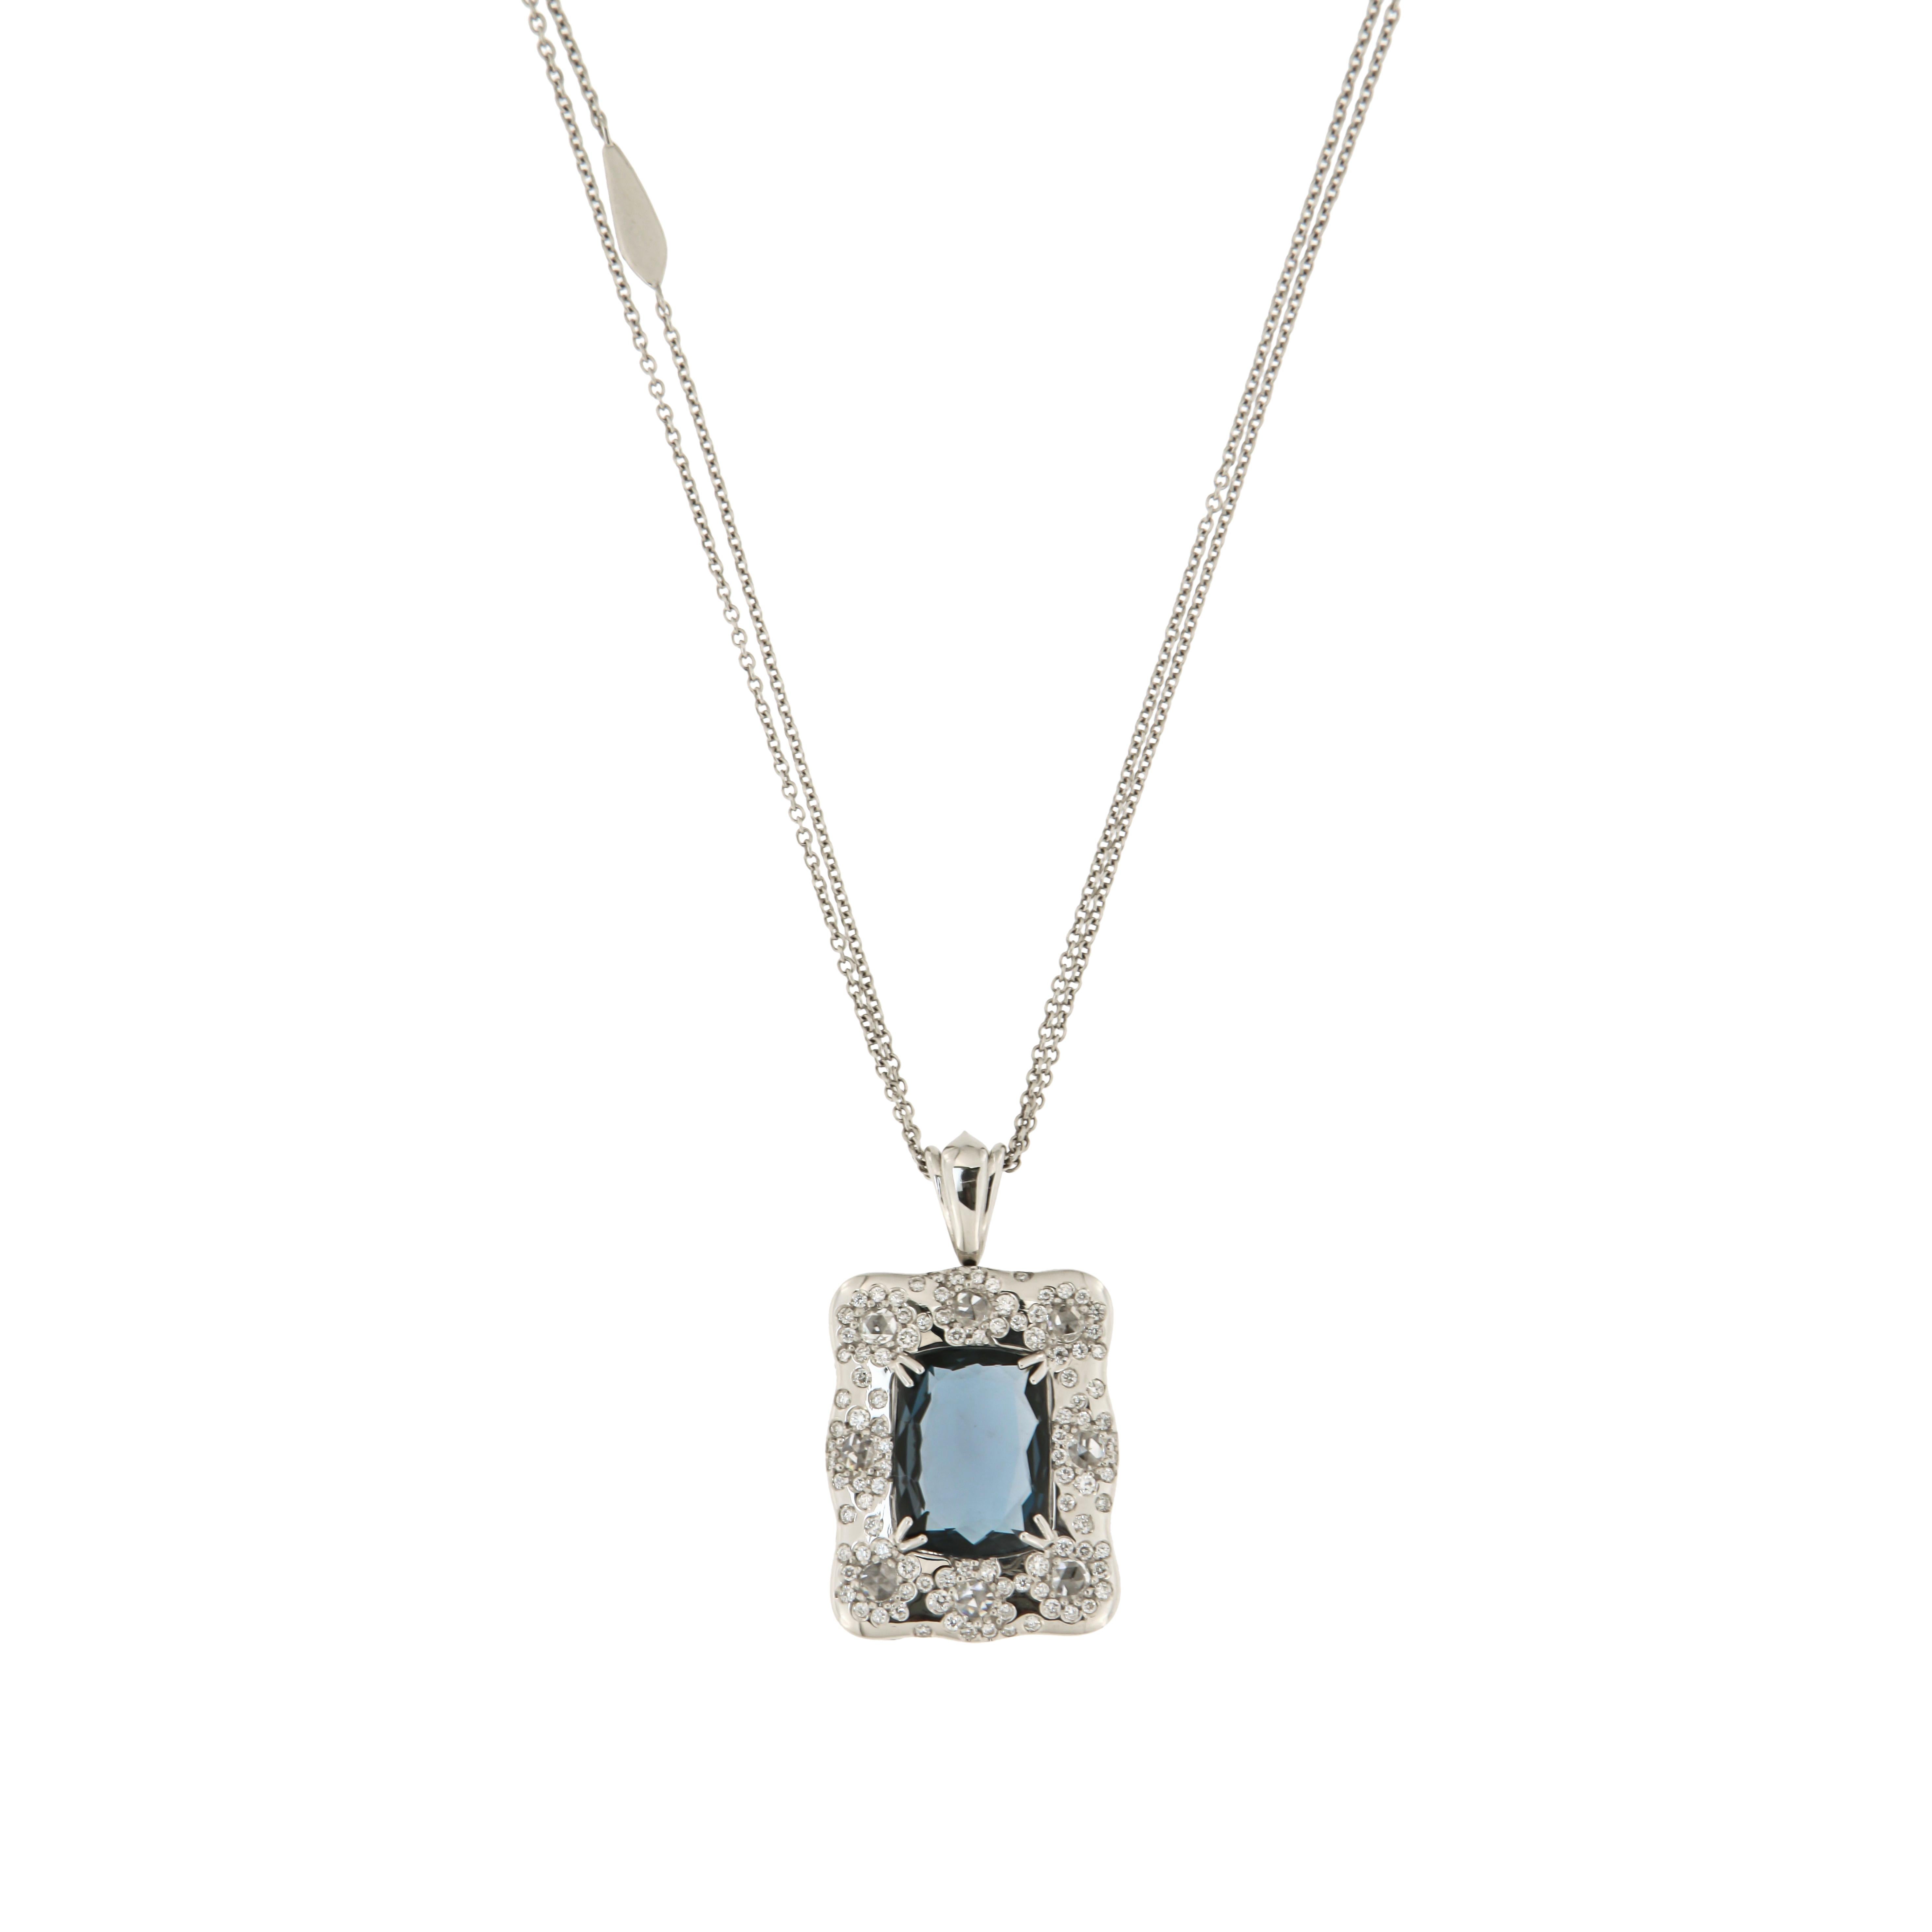 Ring White Gold 18 K (Matching Necklace and Earrings Available)
Diamond 1,14 ct
London Blue Topaz 

Weight 11,1 grams
Different Sizes Available

With a heritage of ancient fine Swiss jewelry traditions, NATKINA is a Geneva based jewellery brand,